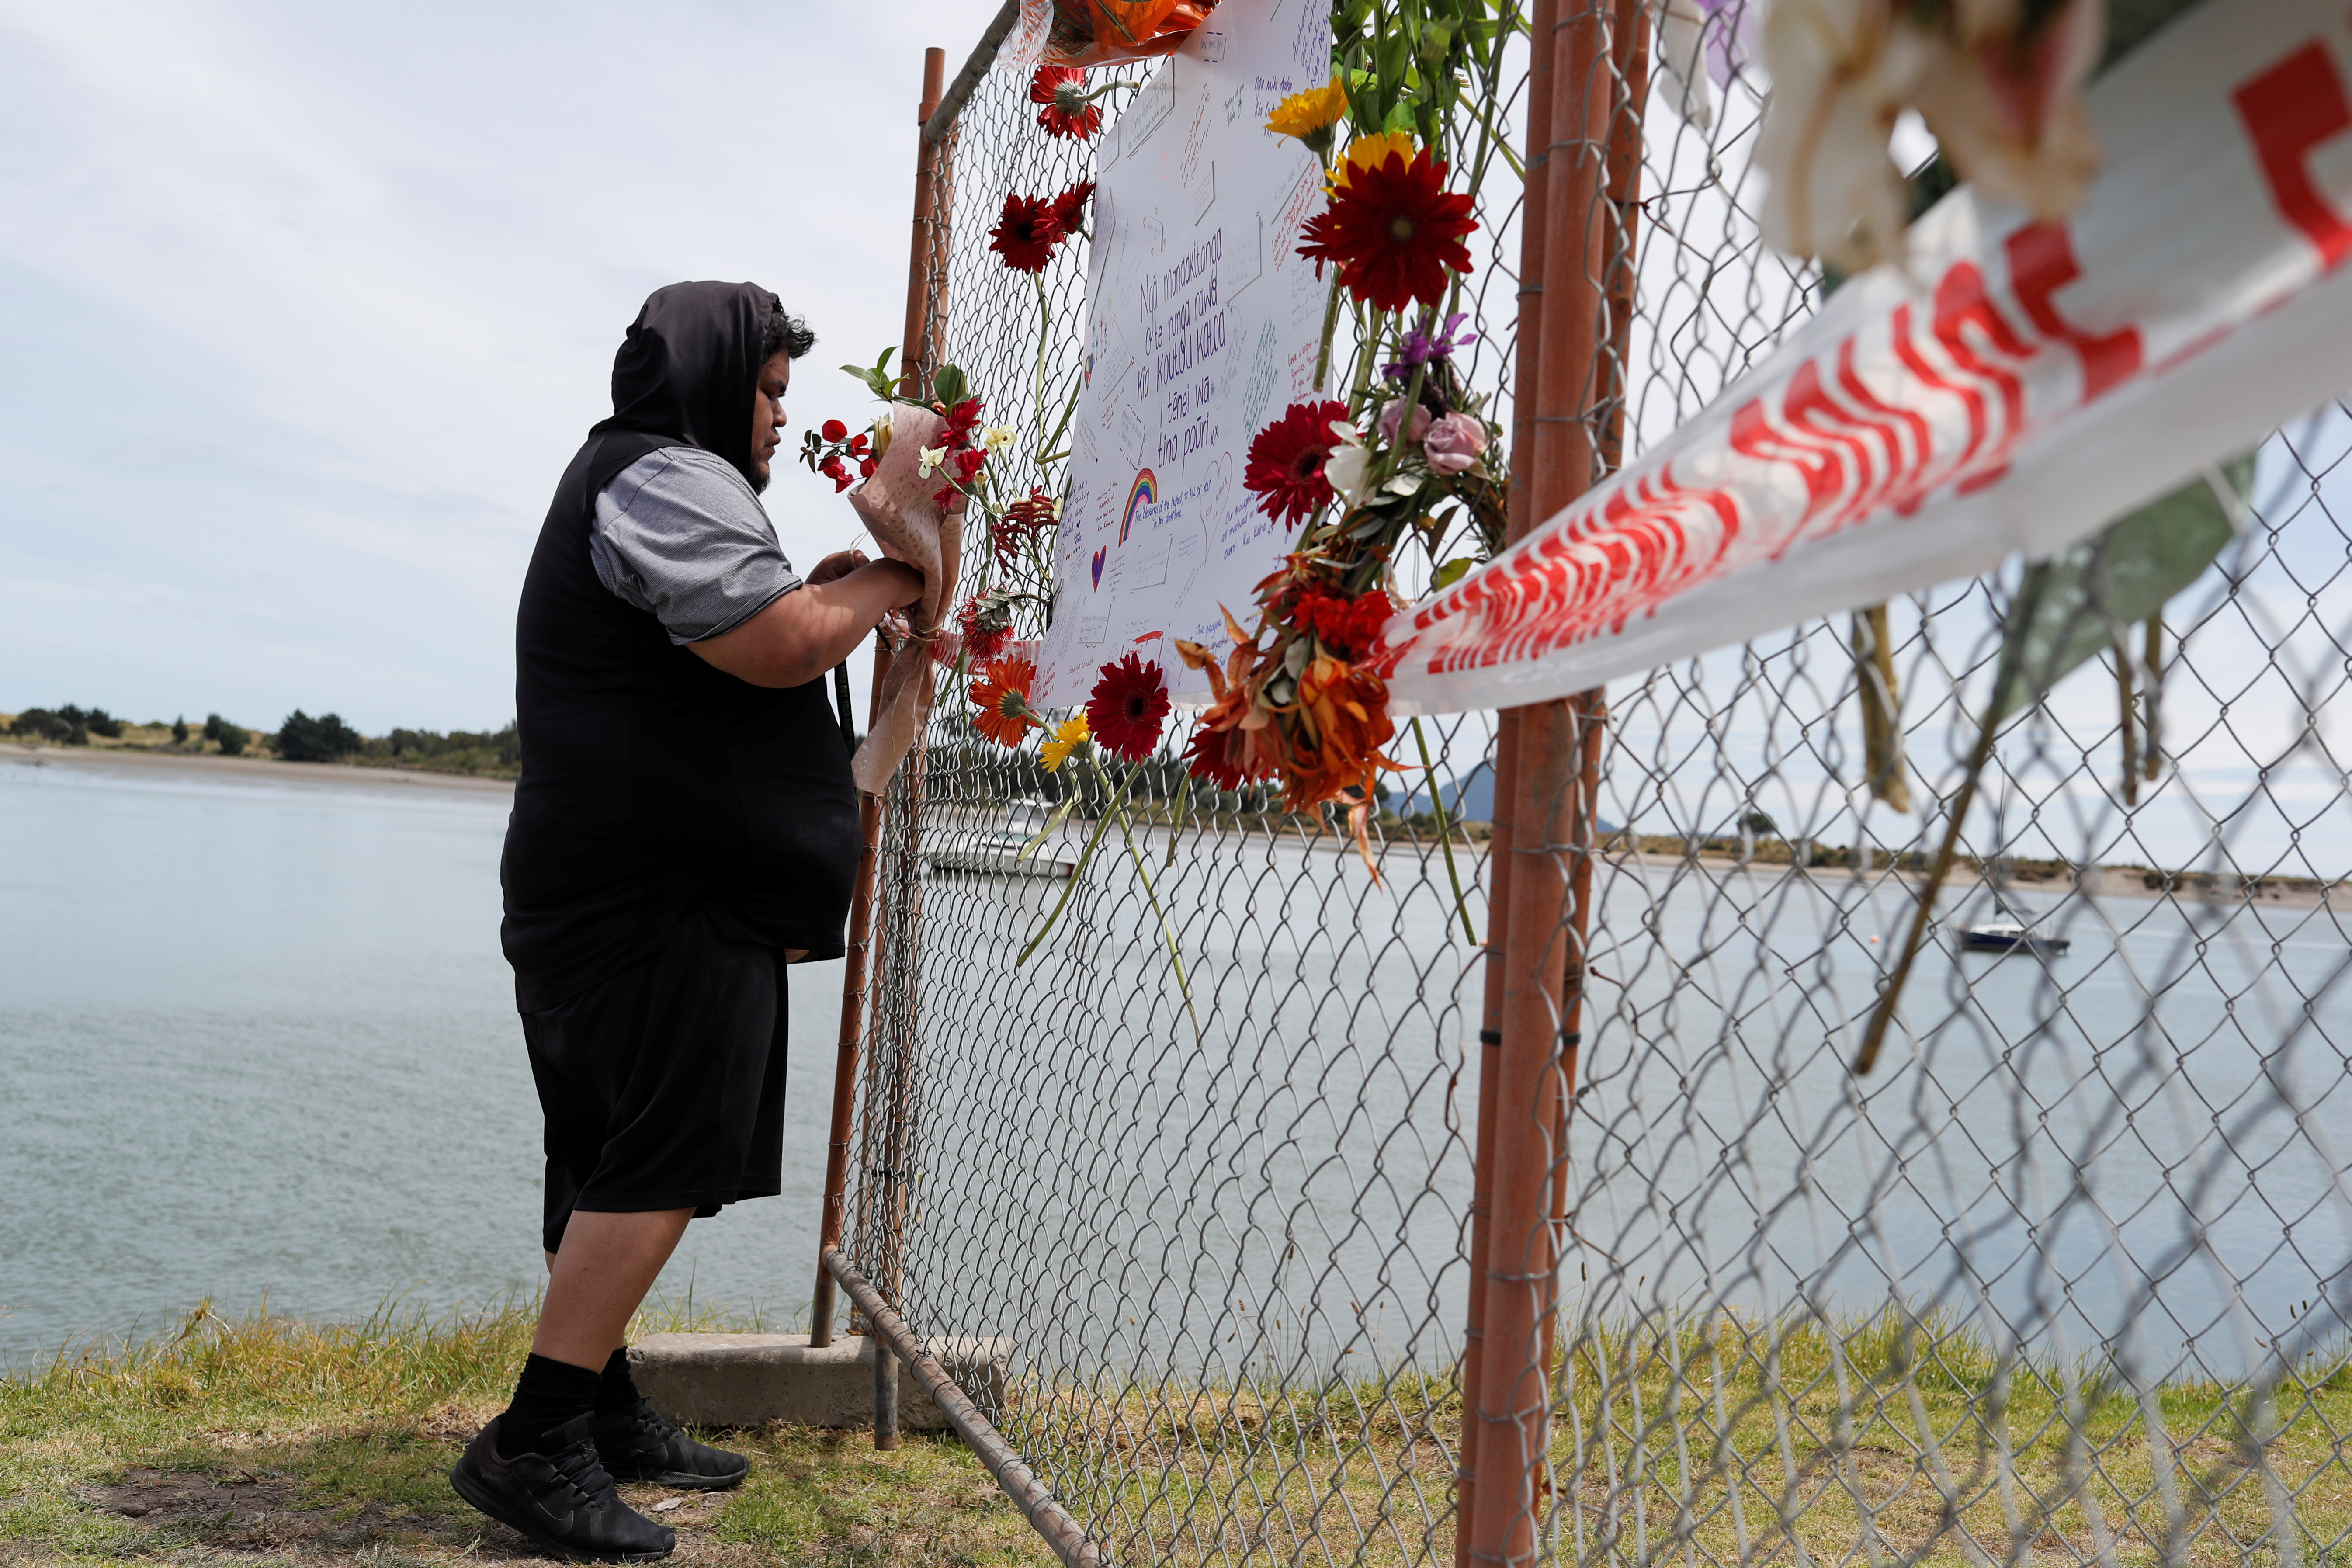 A man offers flowers at a memorial at the harbour in Whakatane, following the White Island volcano eruption in New Zealand